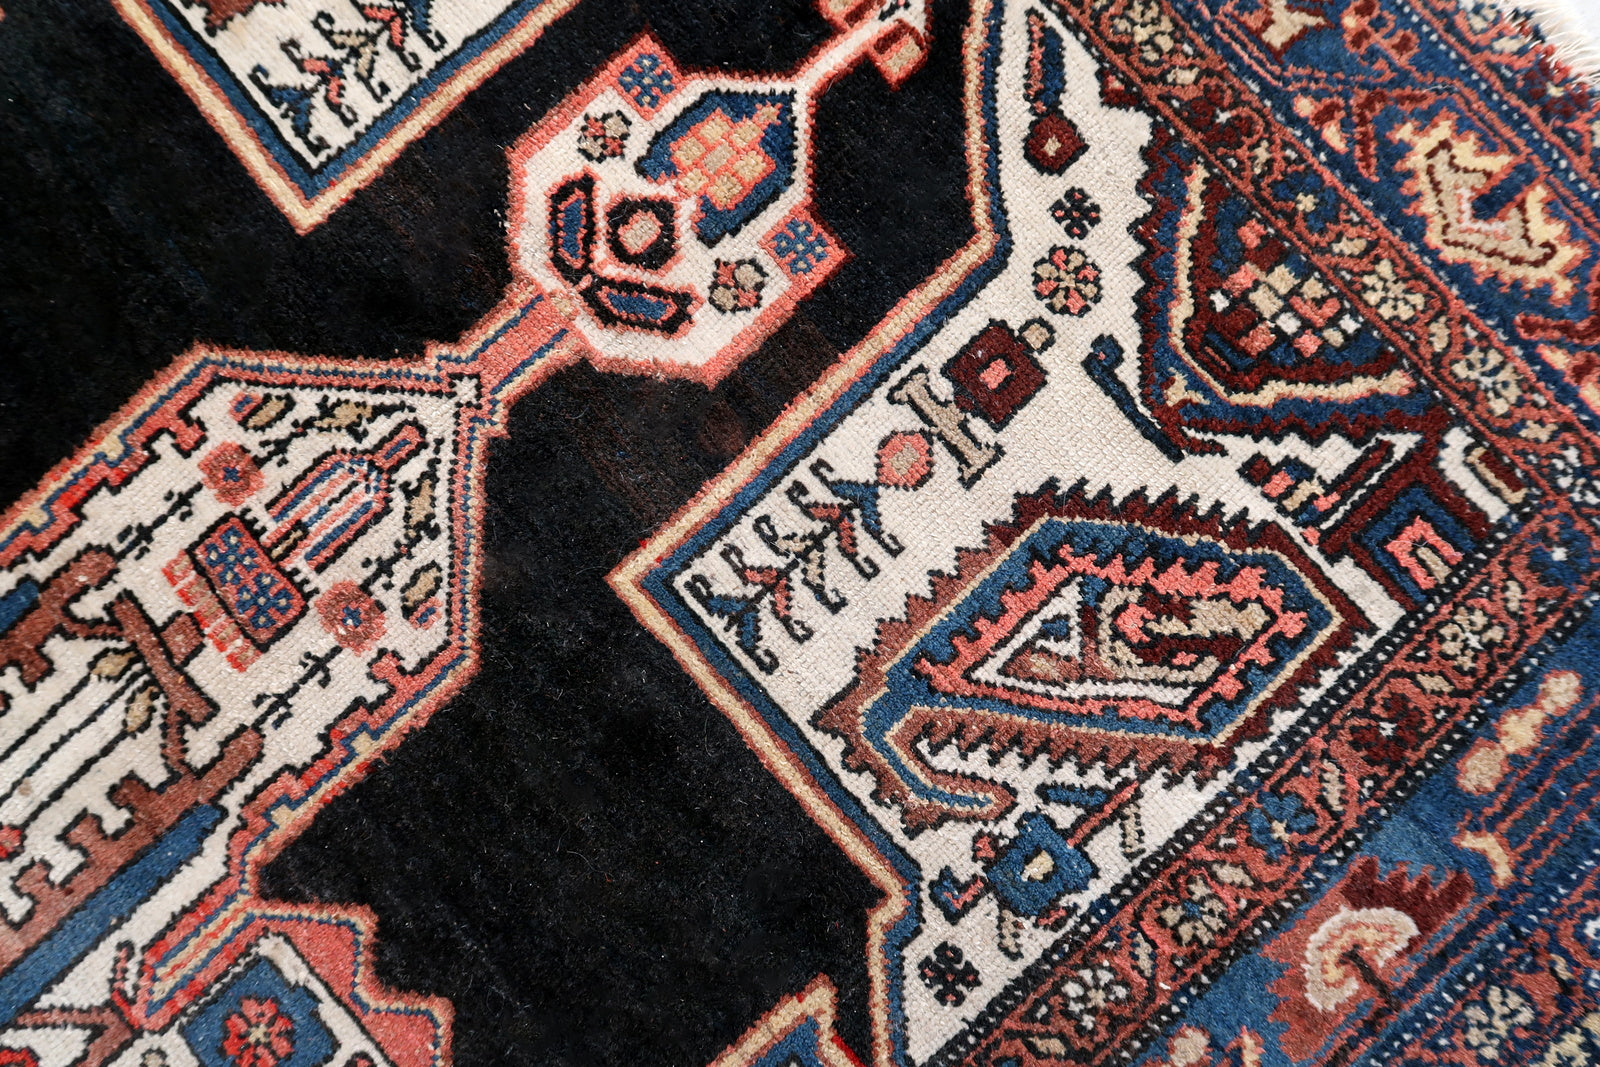 Handmade antique Persian Malayer rug in black and white colors. The rug is from the beginning of 20th century in original condition, it has some low pile.